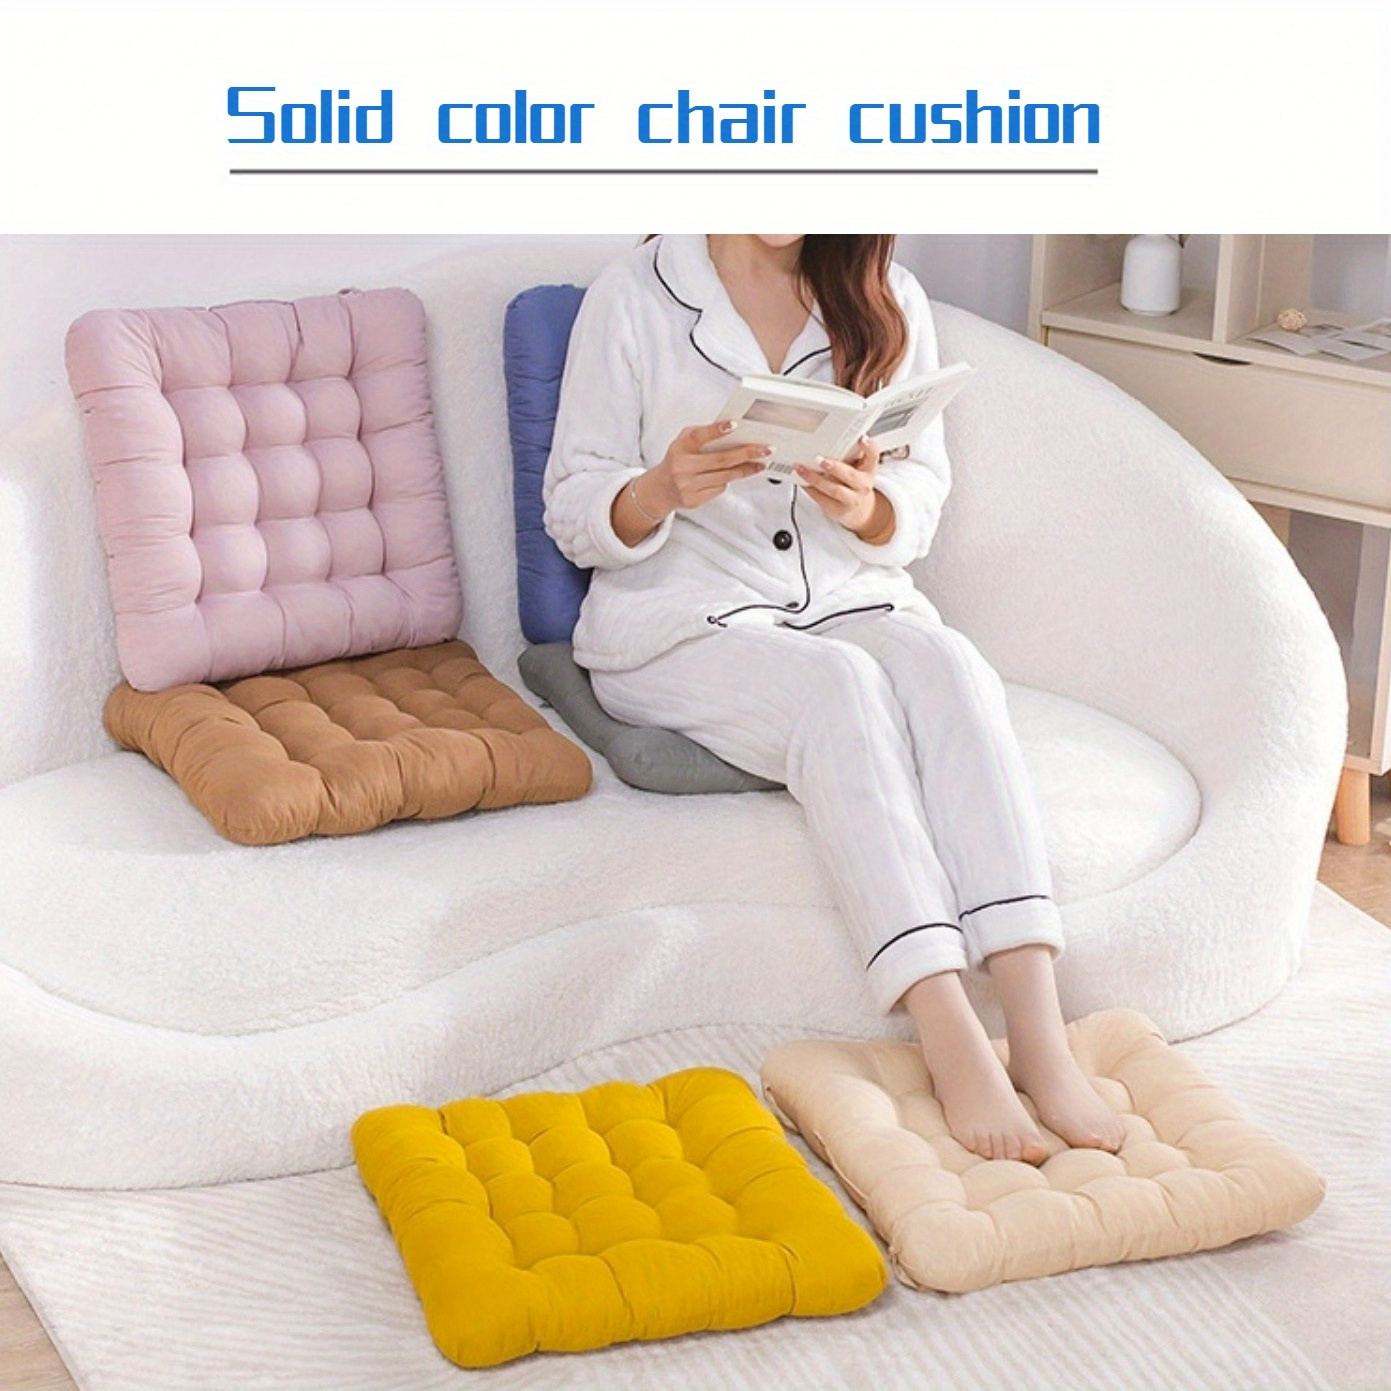 https://img.kwcdn.com/product/solid-color-chair-cushion/d69d2f15w98k18-cc5c12df/open/2023-10-21/1697882306659-26f3ab72f97d4d978d6f167b87573a7e-goods.jpeg?imageView2/2/w/500/q/60/format/webp